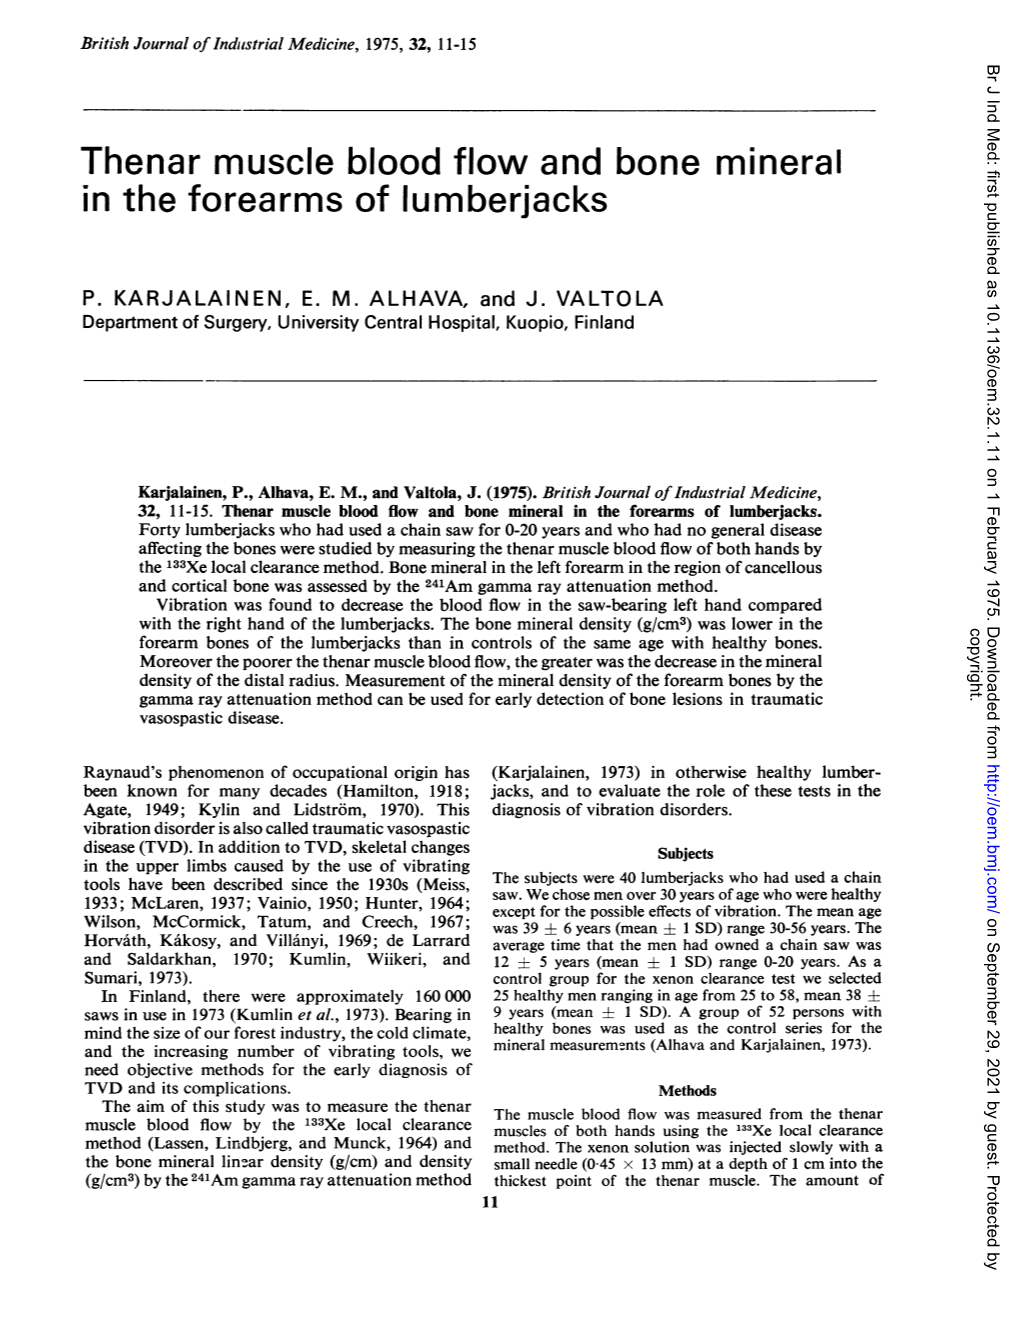 Thenar Muscle Blood Flow and Bone Mineral in the Forearms of Lumberjacks